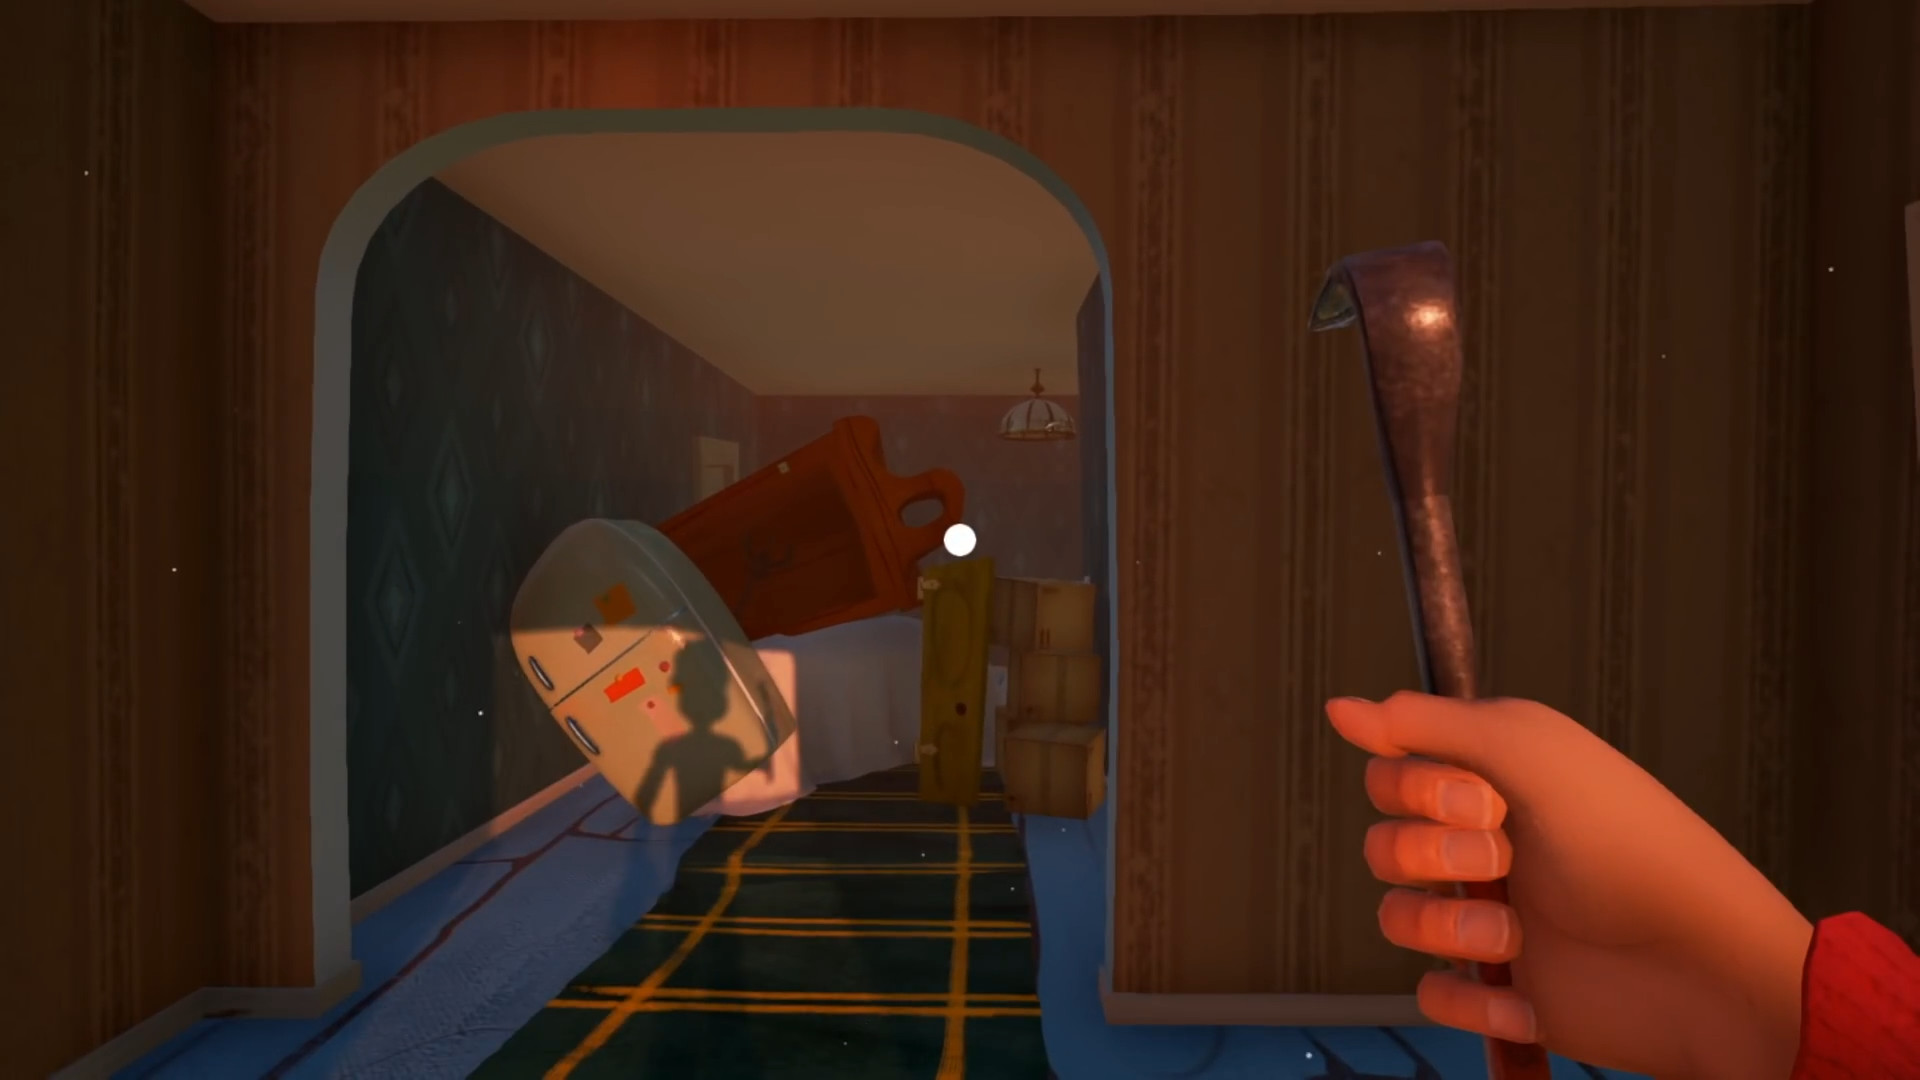 hello neighbor alpha 2 android download